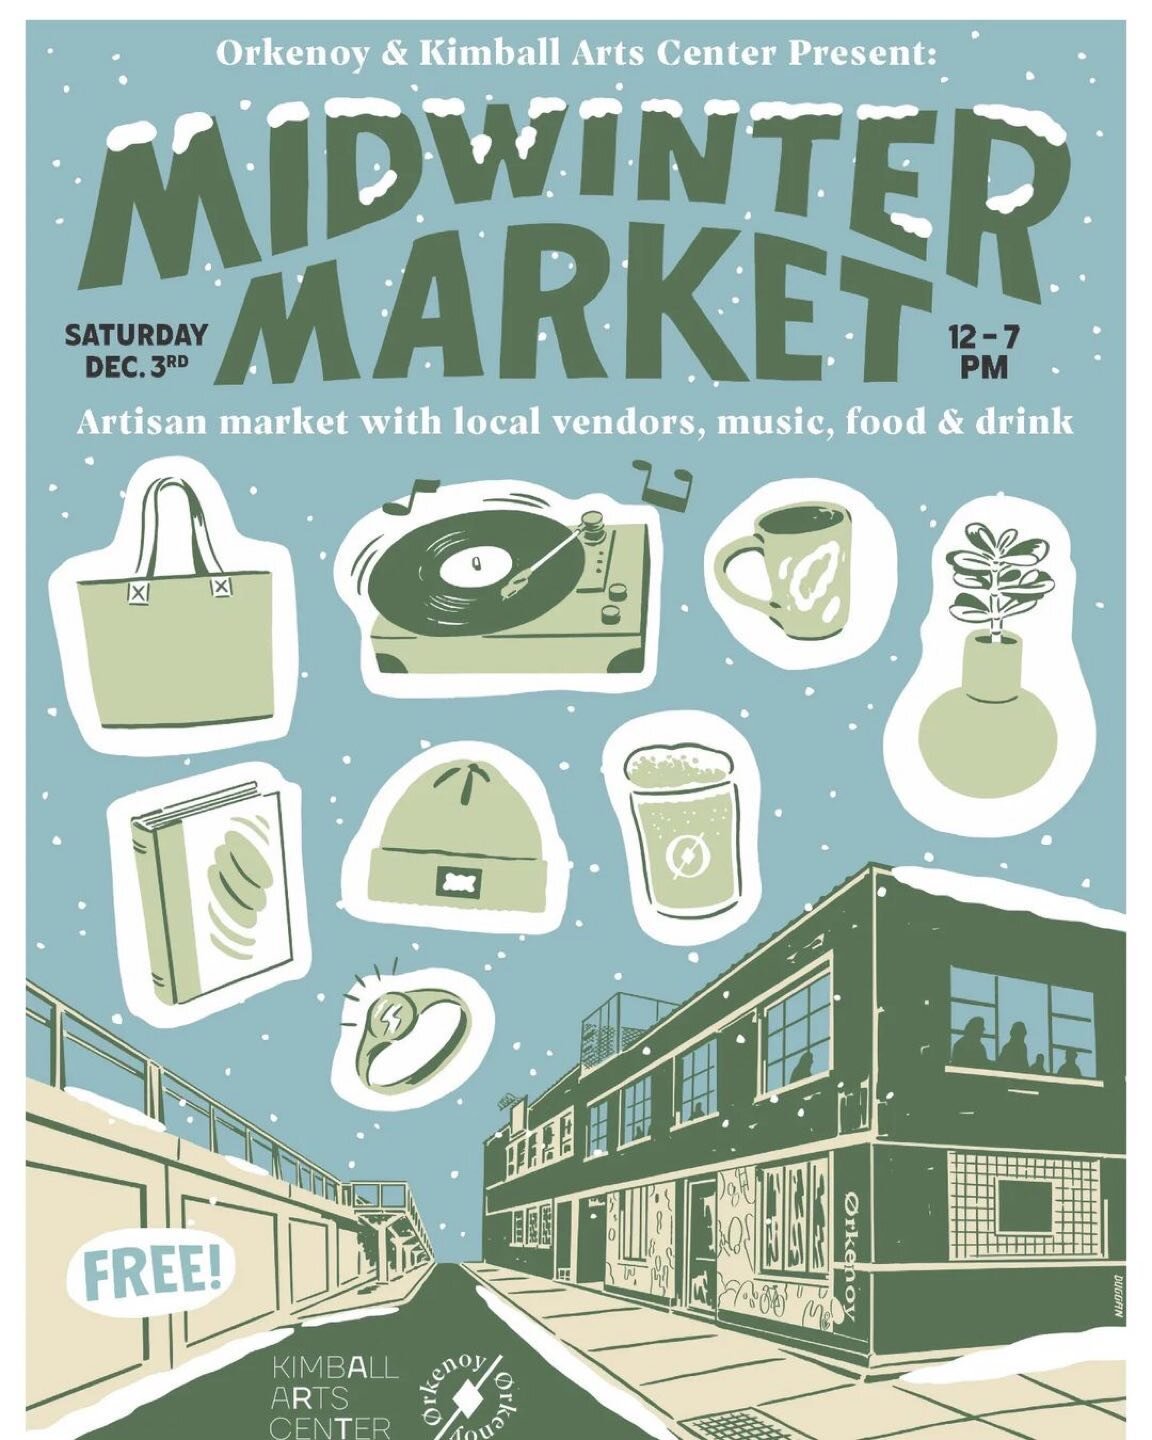 Art, music, vintage, records, jewelry, crafts, food, drinks, and on and on and on.....

Come hang with us at the 2022 Midwinter Market on December 3rd!

Celebrating Chicago's creative and maker community. We'll be serving up Primary Colors blends alo